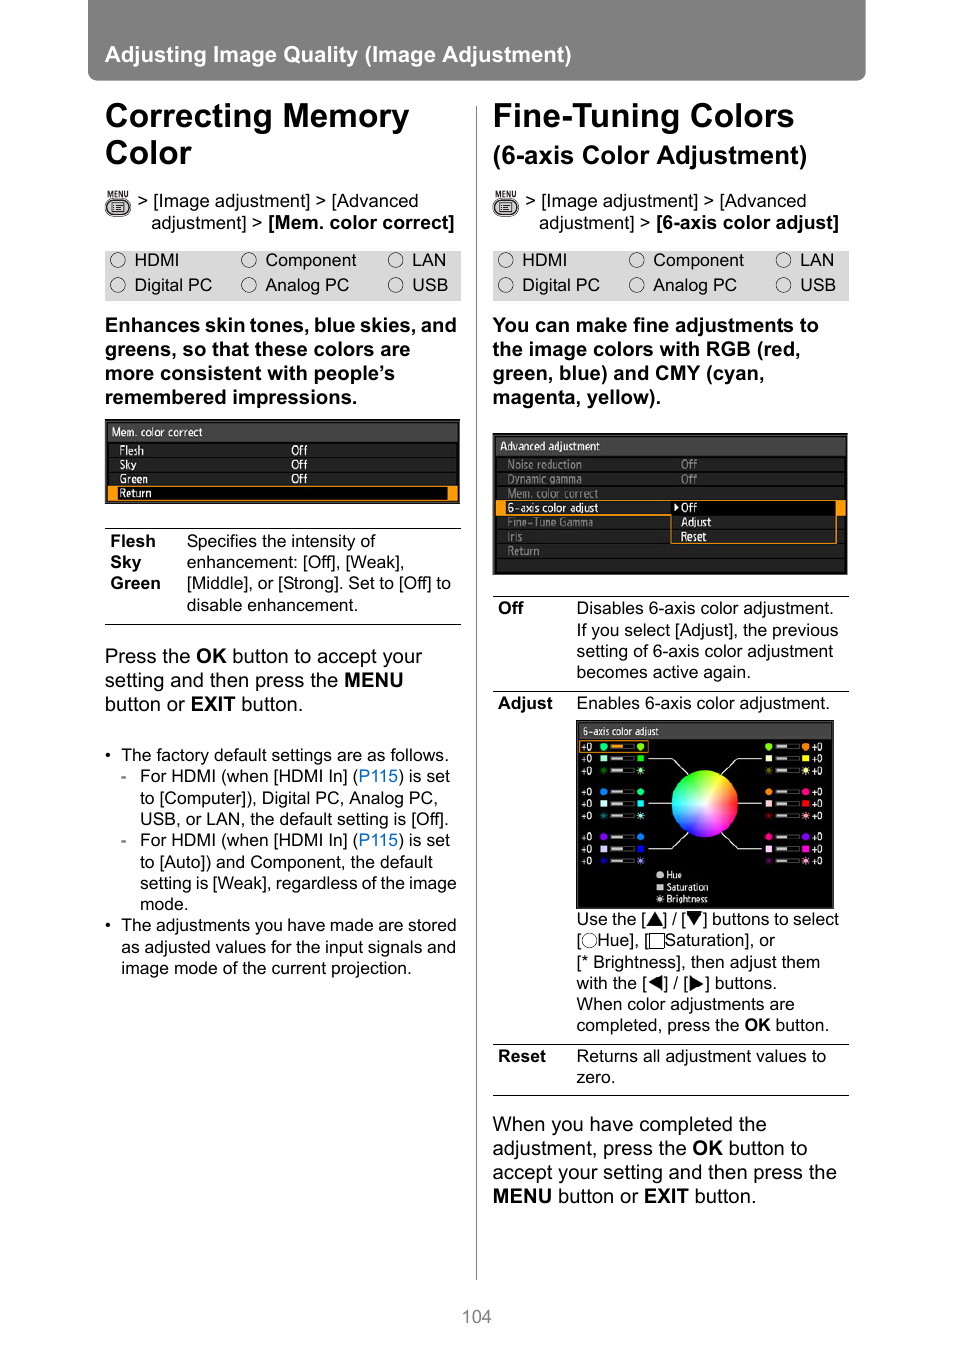 Correcting memory color, Fine-tuning colors (6-axis color adjustment), Fine-tuning colors | Axis color adjustment) | Canon XEED WUX450 User Manual | Page 104 / 314